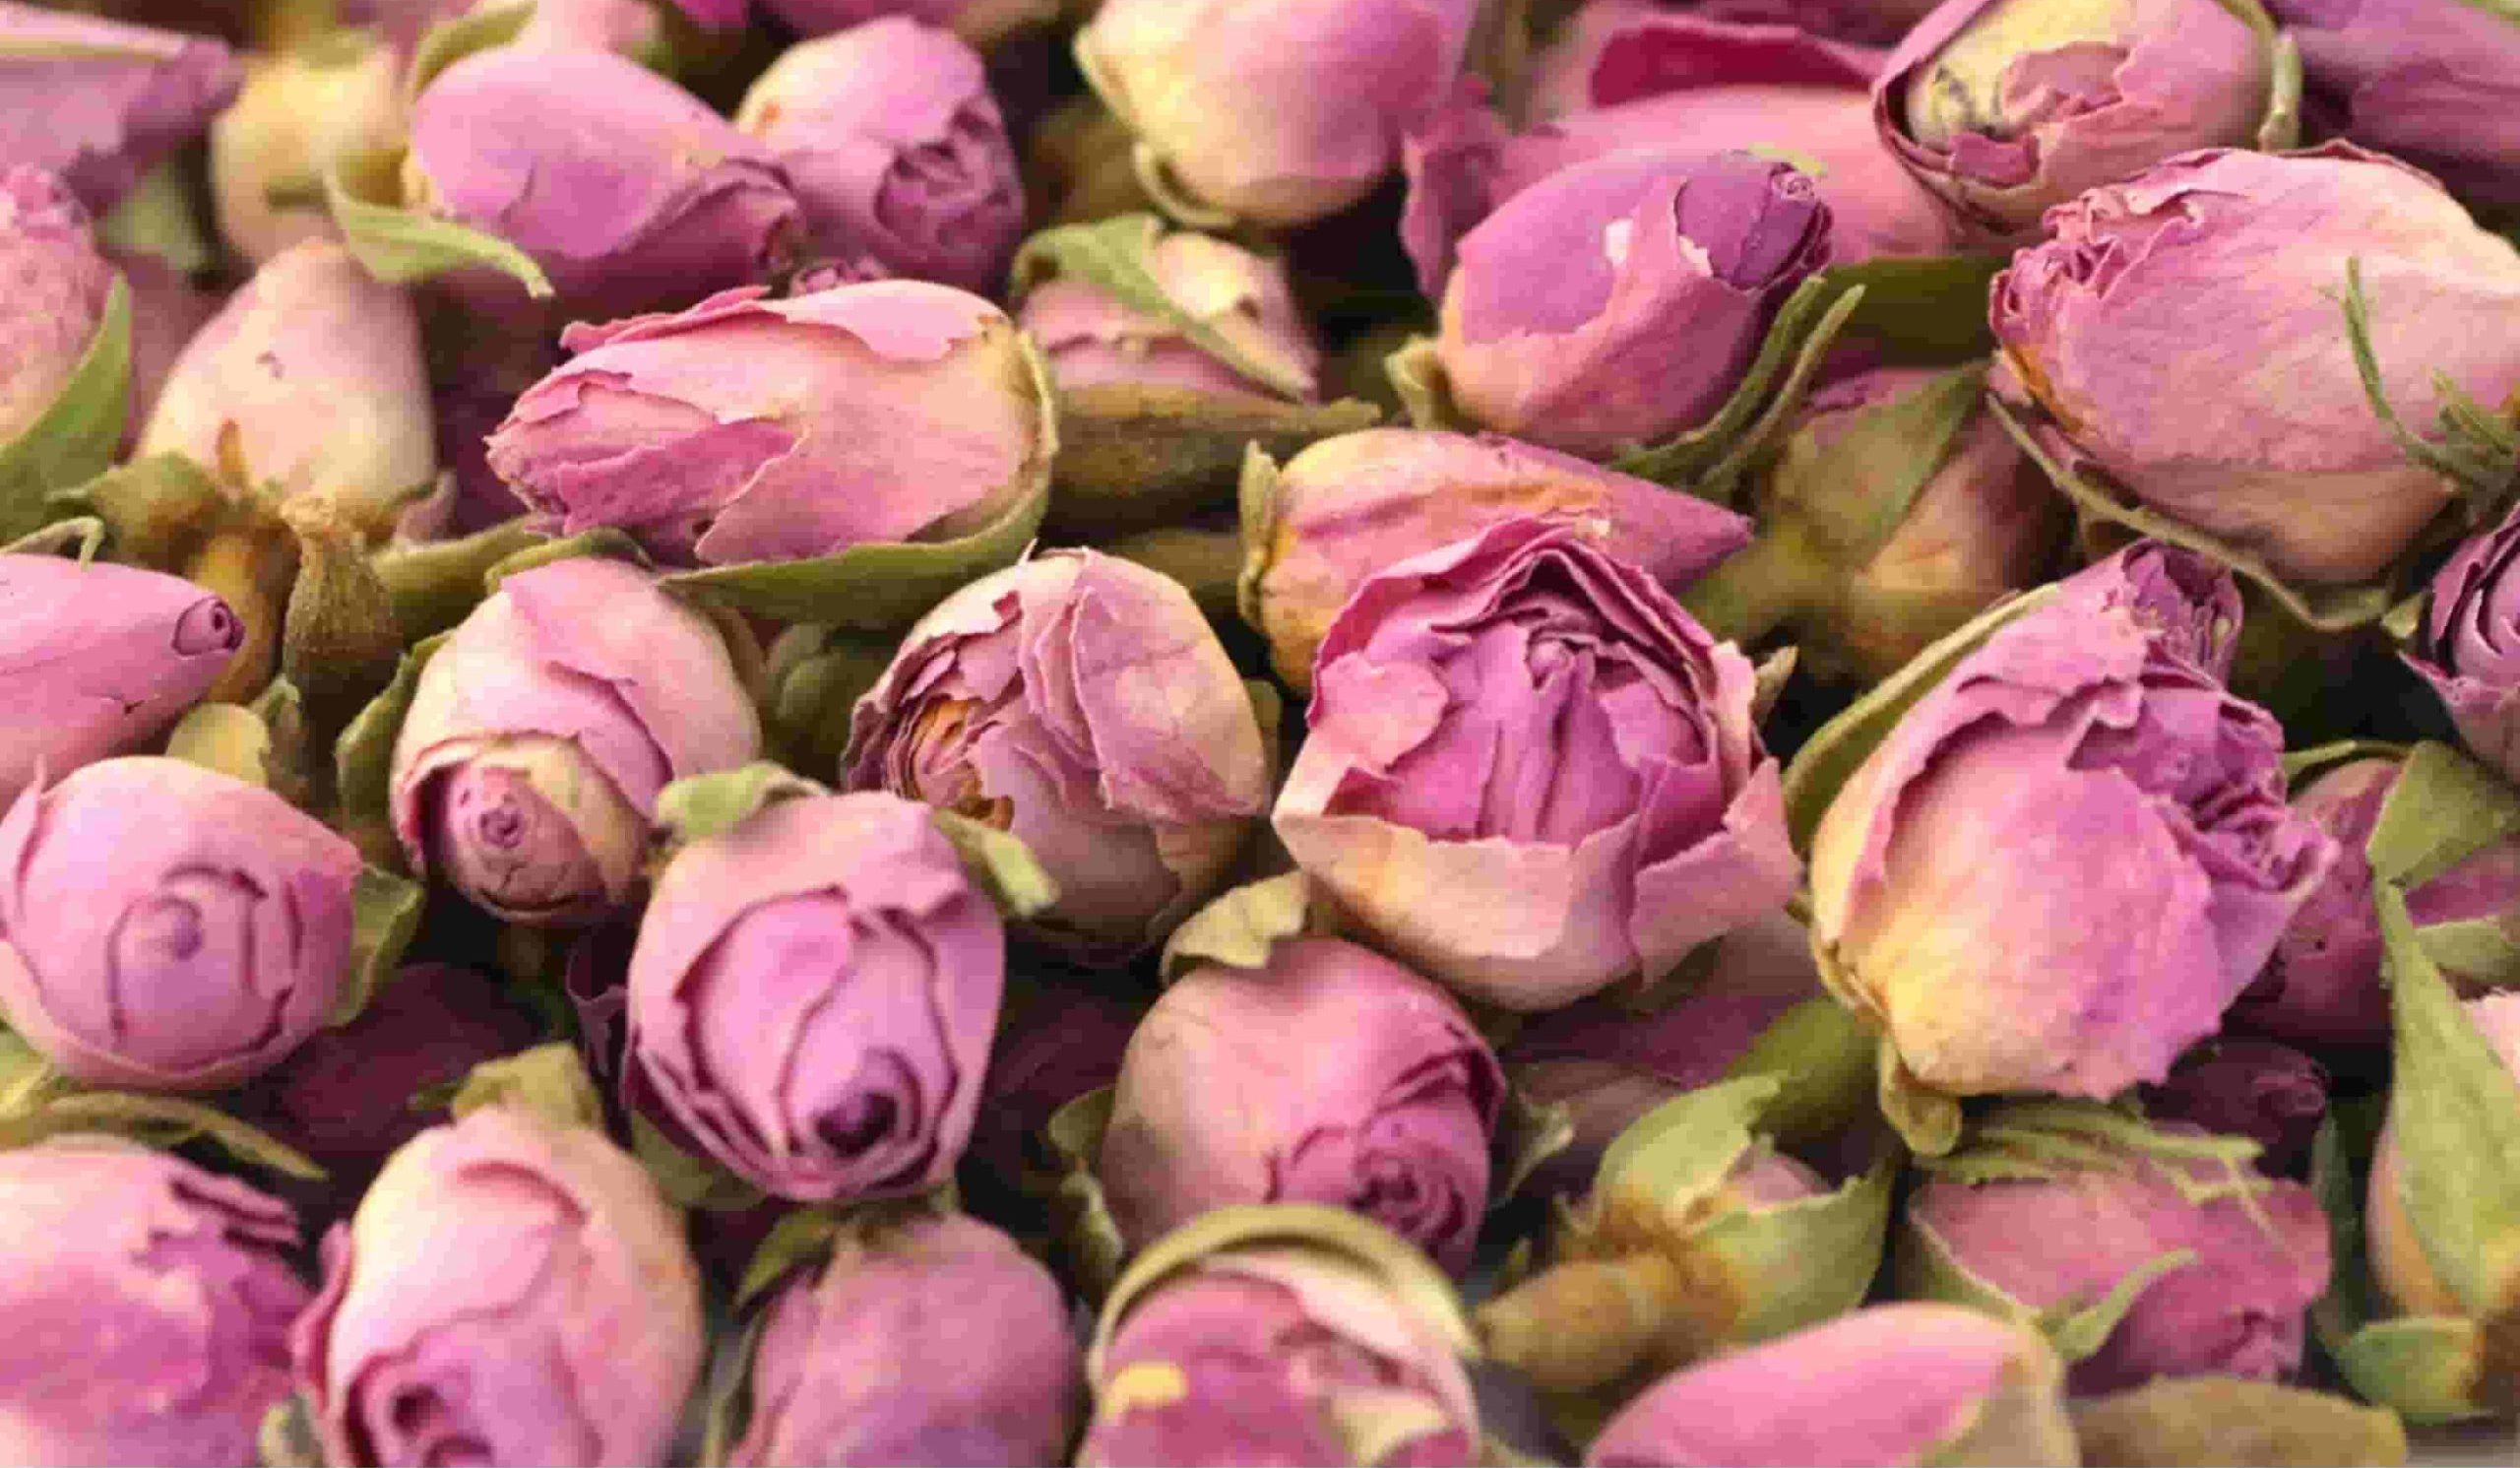 Buy All Kinds of Dried Primary Rosebud + Price